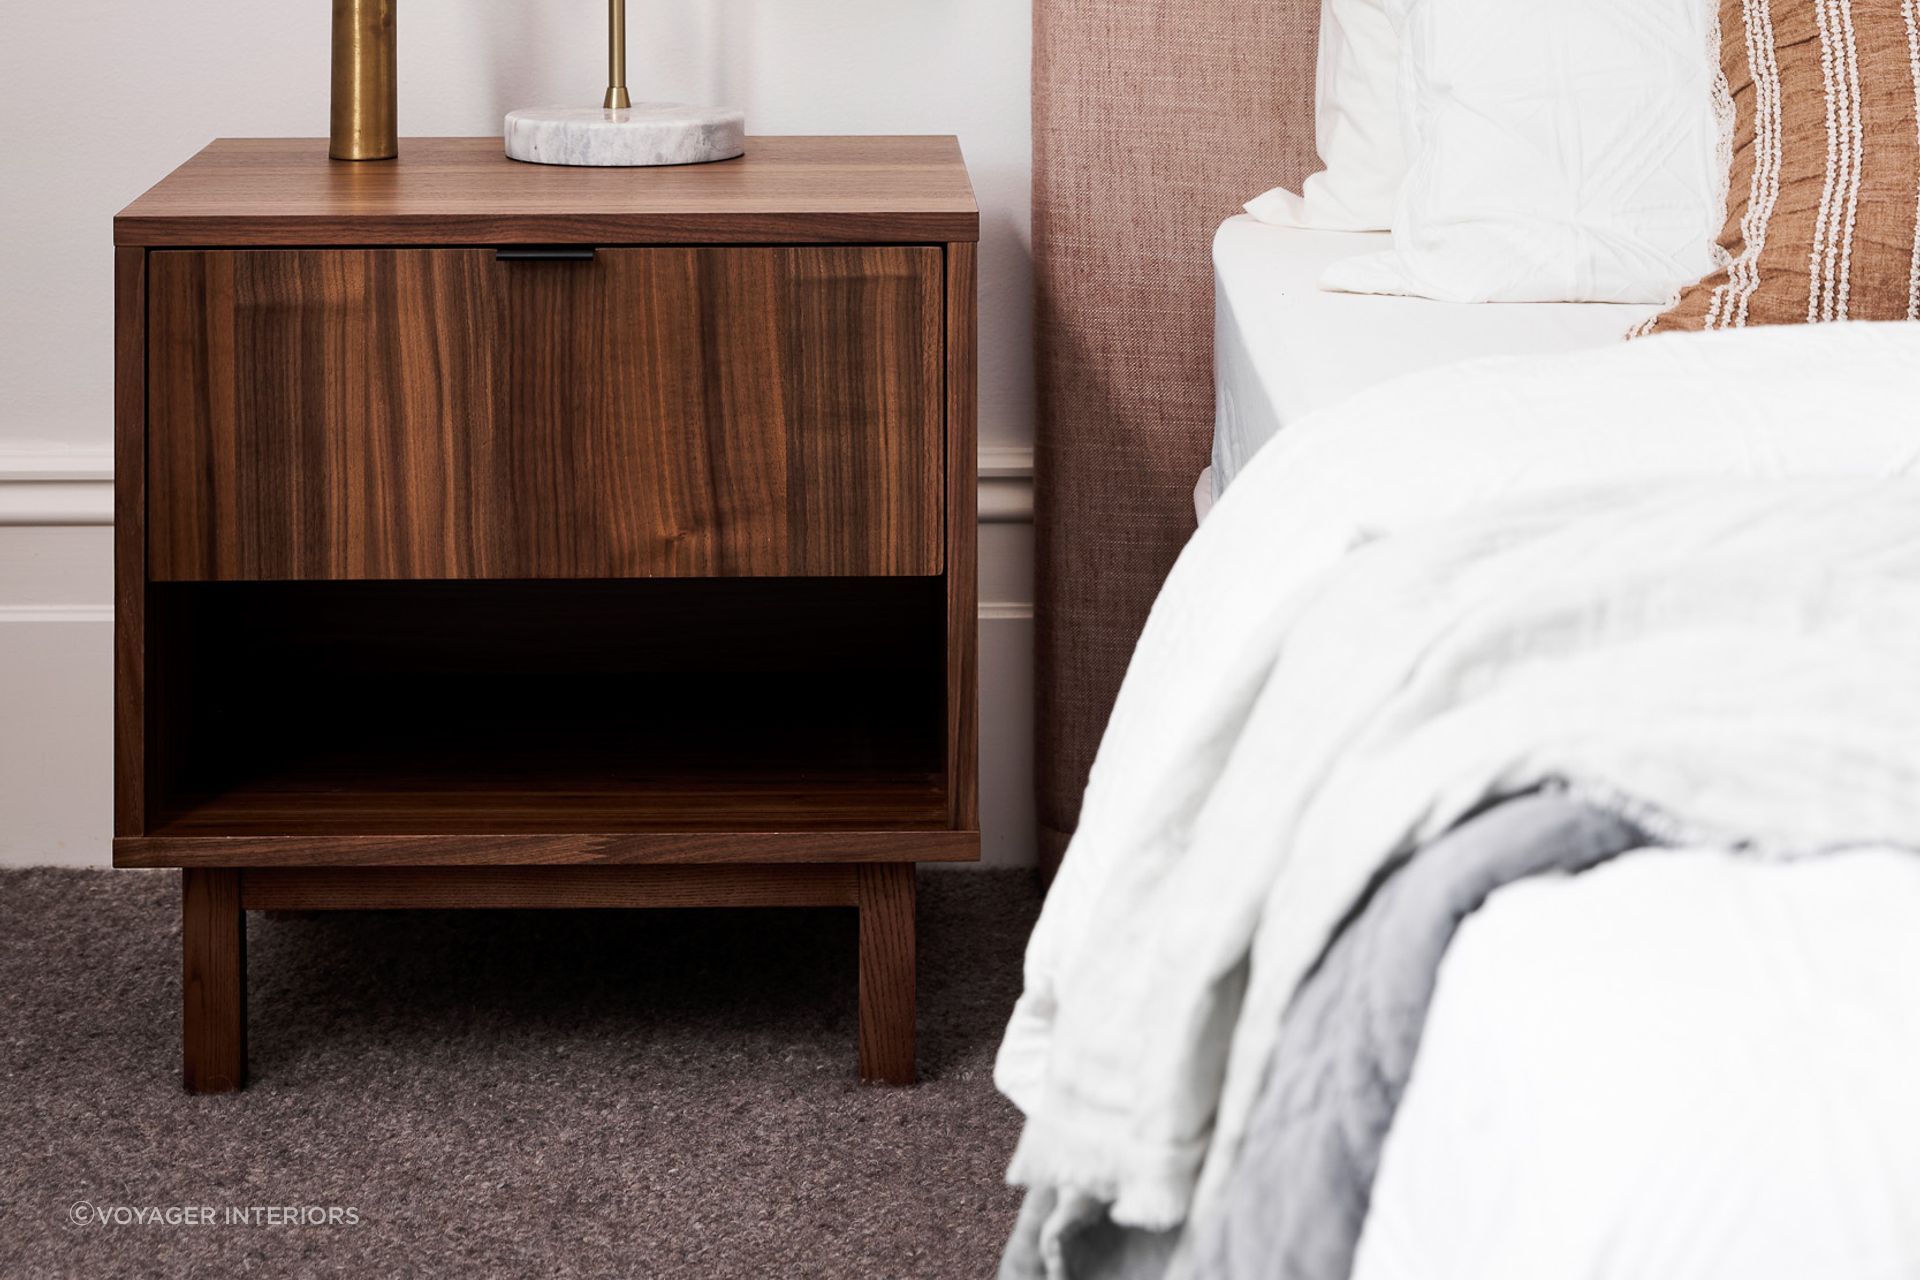 A compact bedside table not only saves on space, but also provides adequate storage and a single or multiple drawers. Featured product: Dream Bedside Unit.